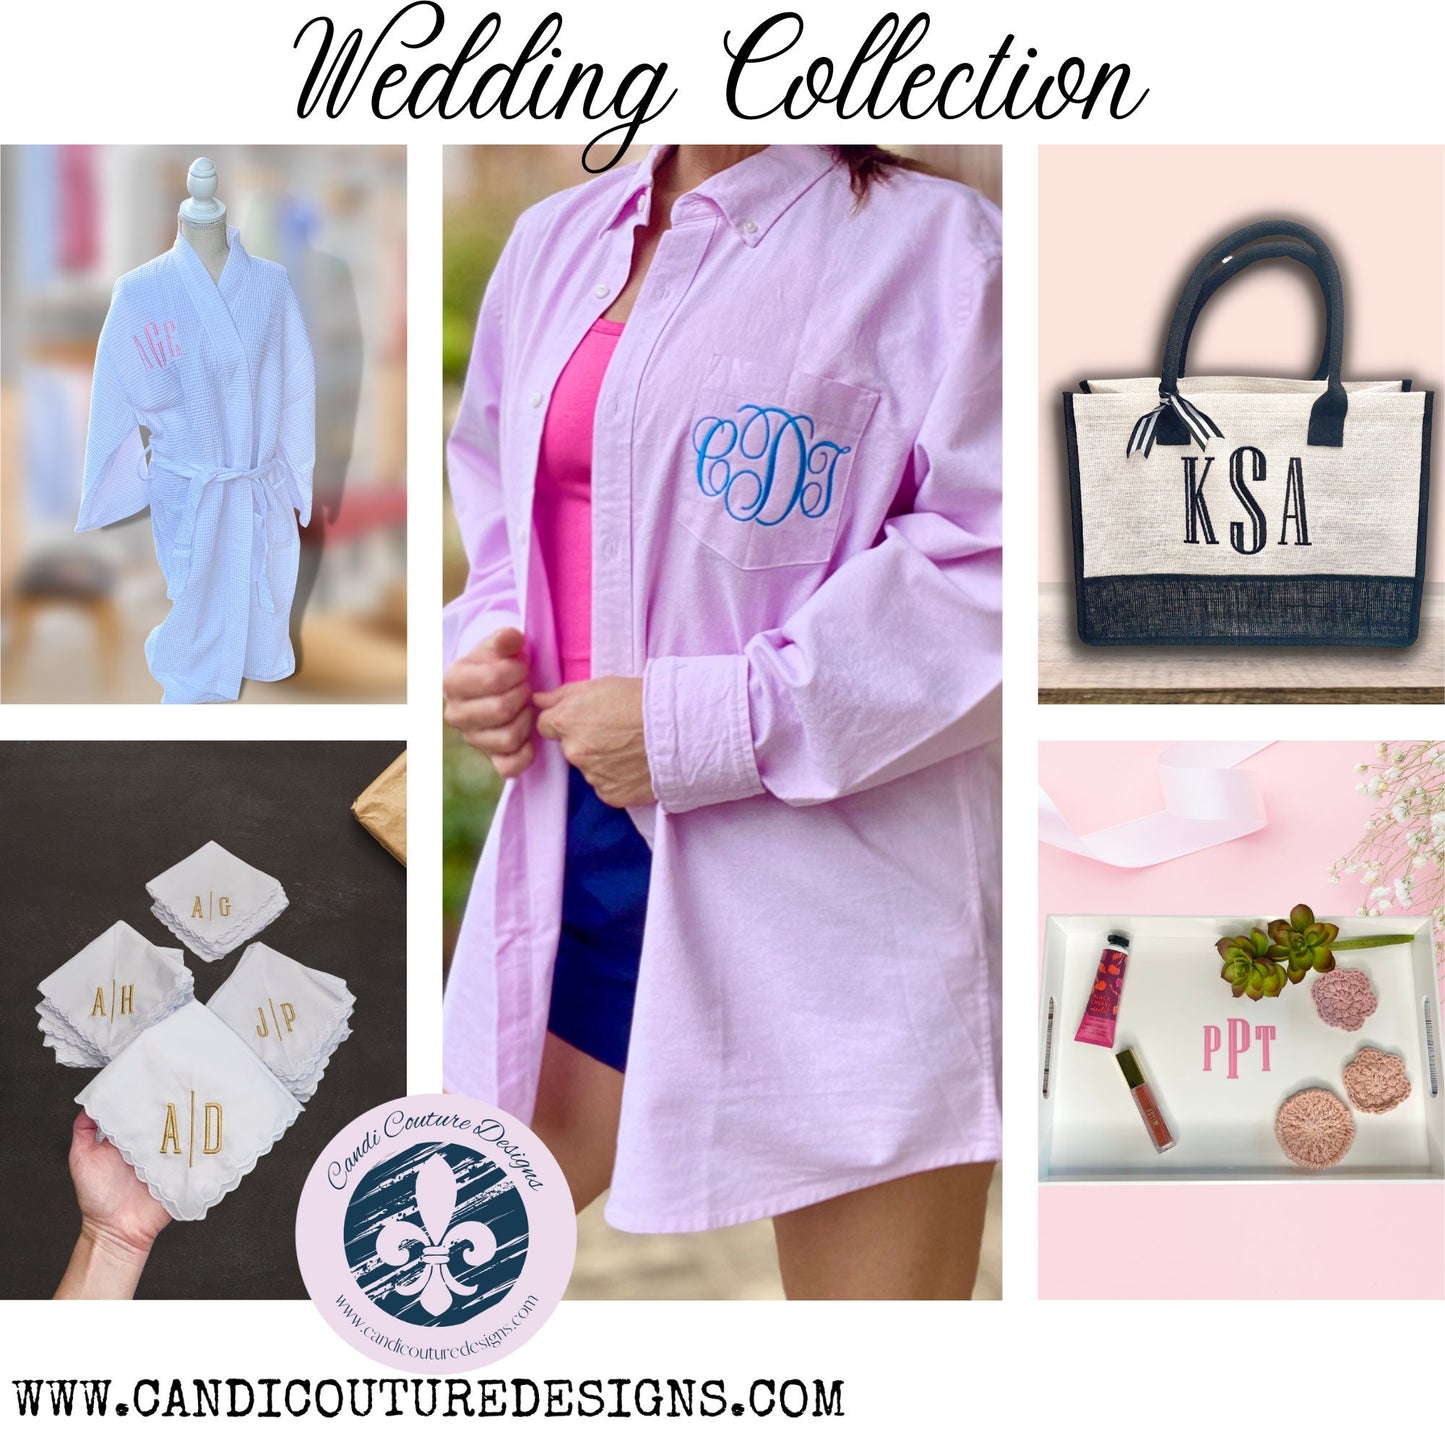 Looking for a unique and personalized touch for your wedding or bridal party? Our collection of monogrammed gifts offers the perfect solution. From stylish accessories to practical items, each gift is customized with a personal touch that will make your special day unforgettable. Browse our collection now and let us help you create a one-of-a-kind experience for your loved ones.